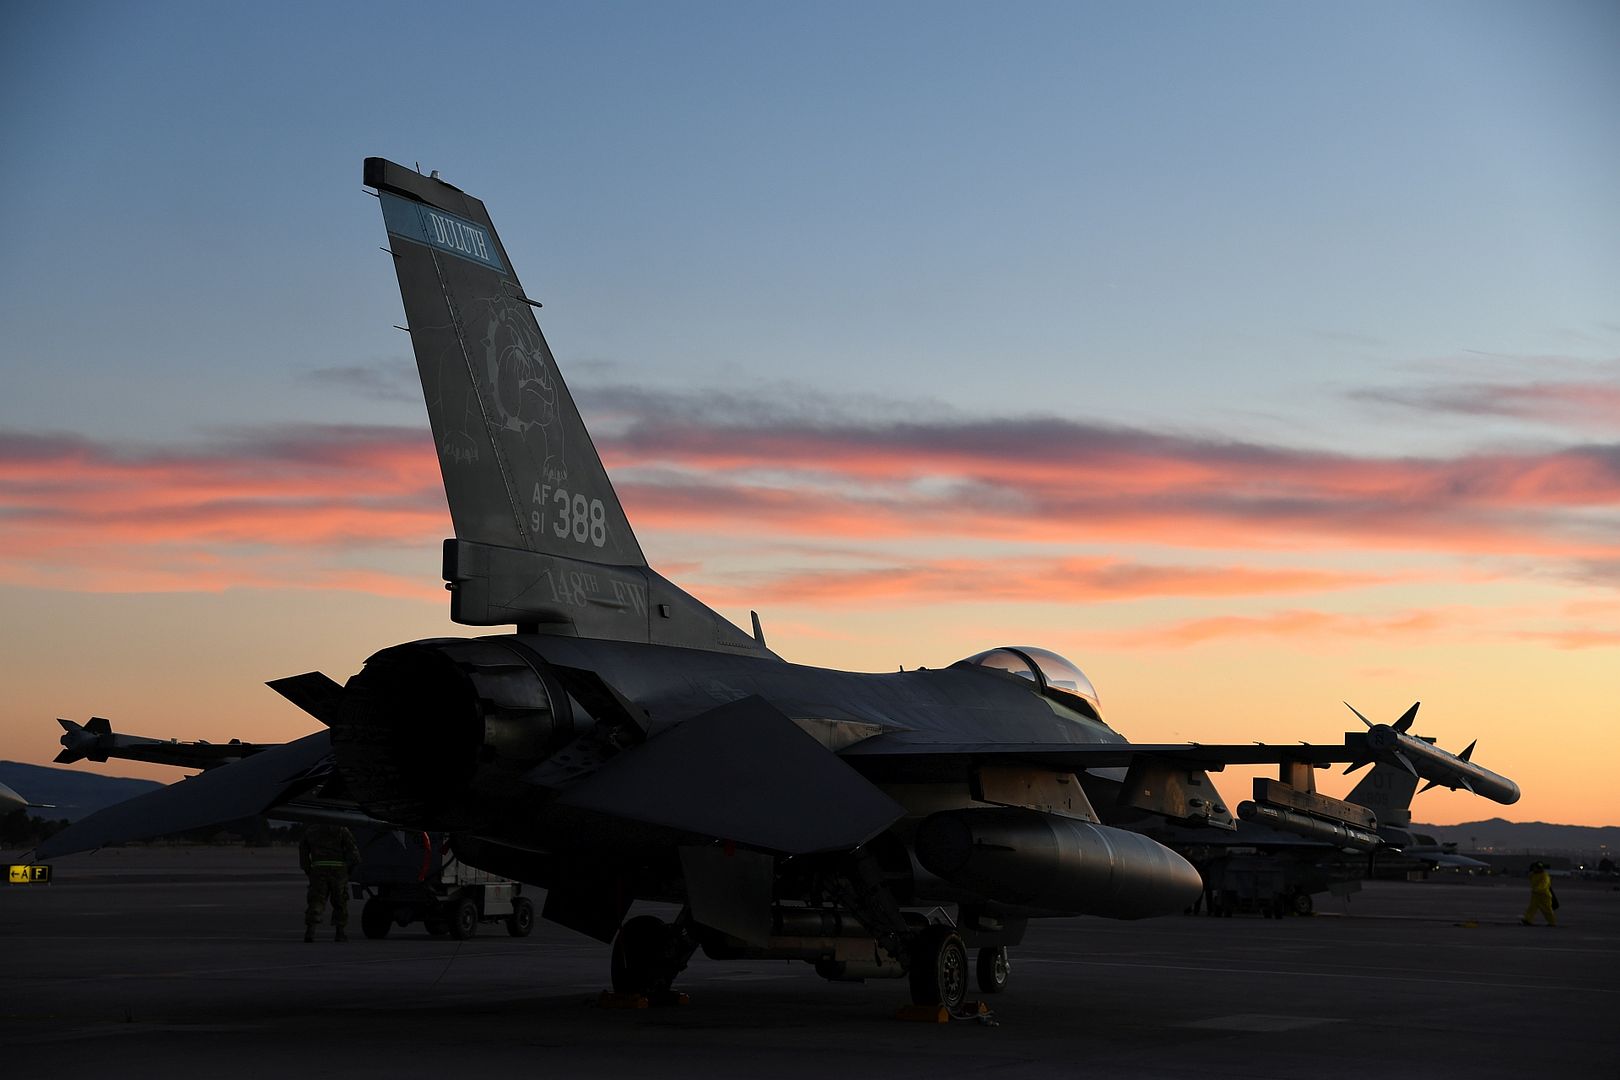 16 Fighting Falcon Assigned To The 148th Fighter Wing Minnesota Air National Is Parked At Sunset At Nellis Air Force Base Nevada On February 9 2022 